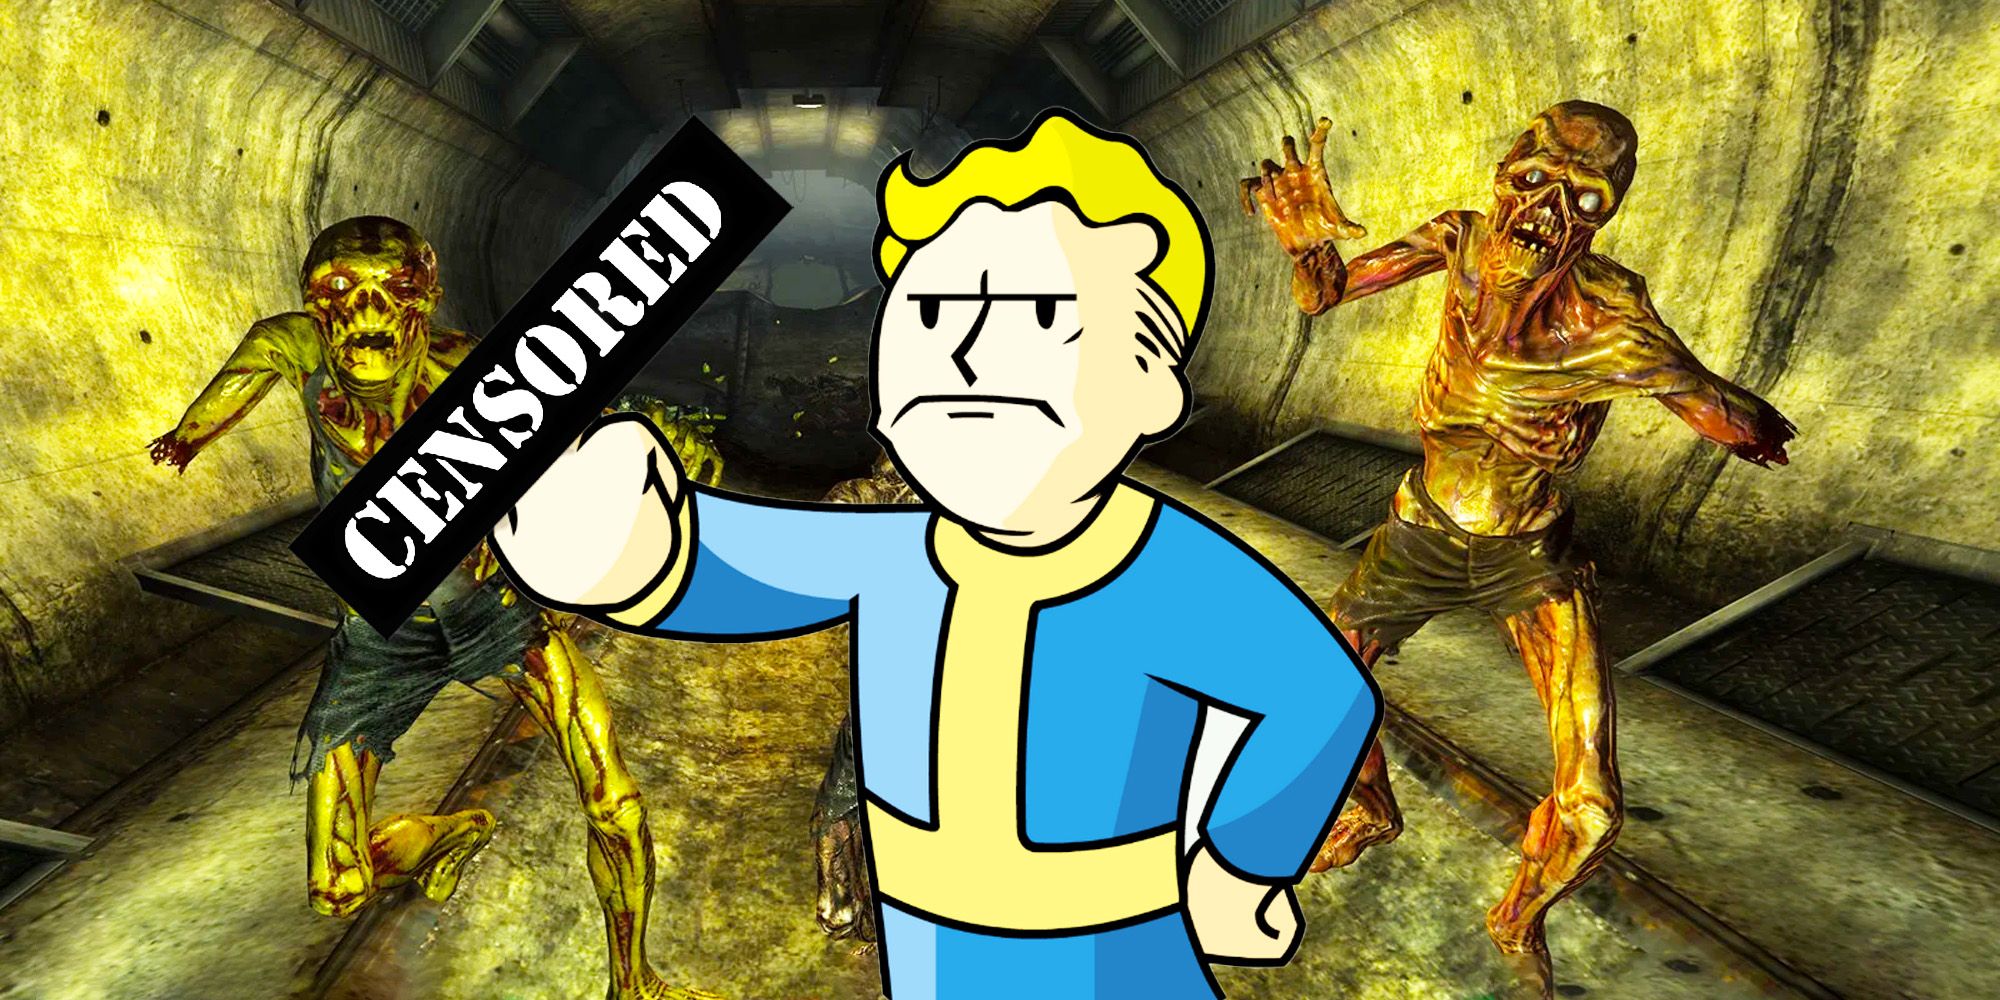 Fallout's Vault Boy looking angry, with a censored hand gesture, in front of two ghouls from Fallout 3.